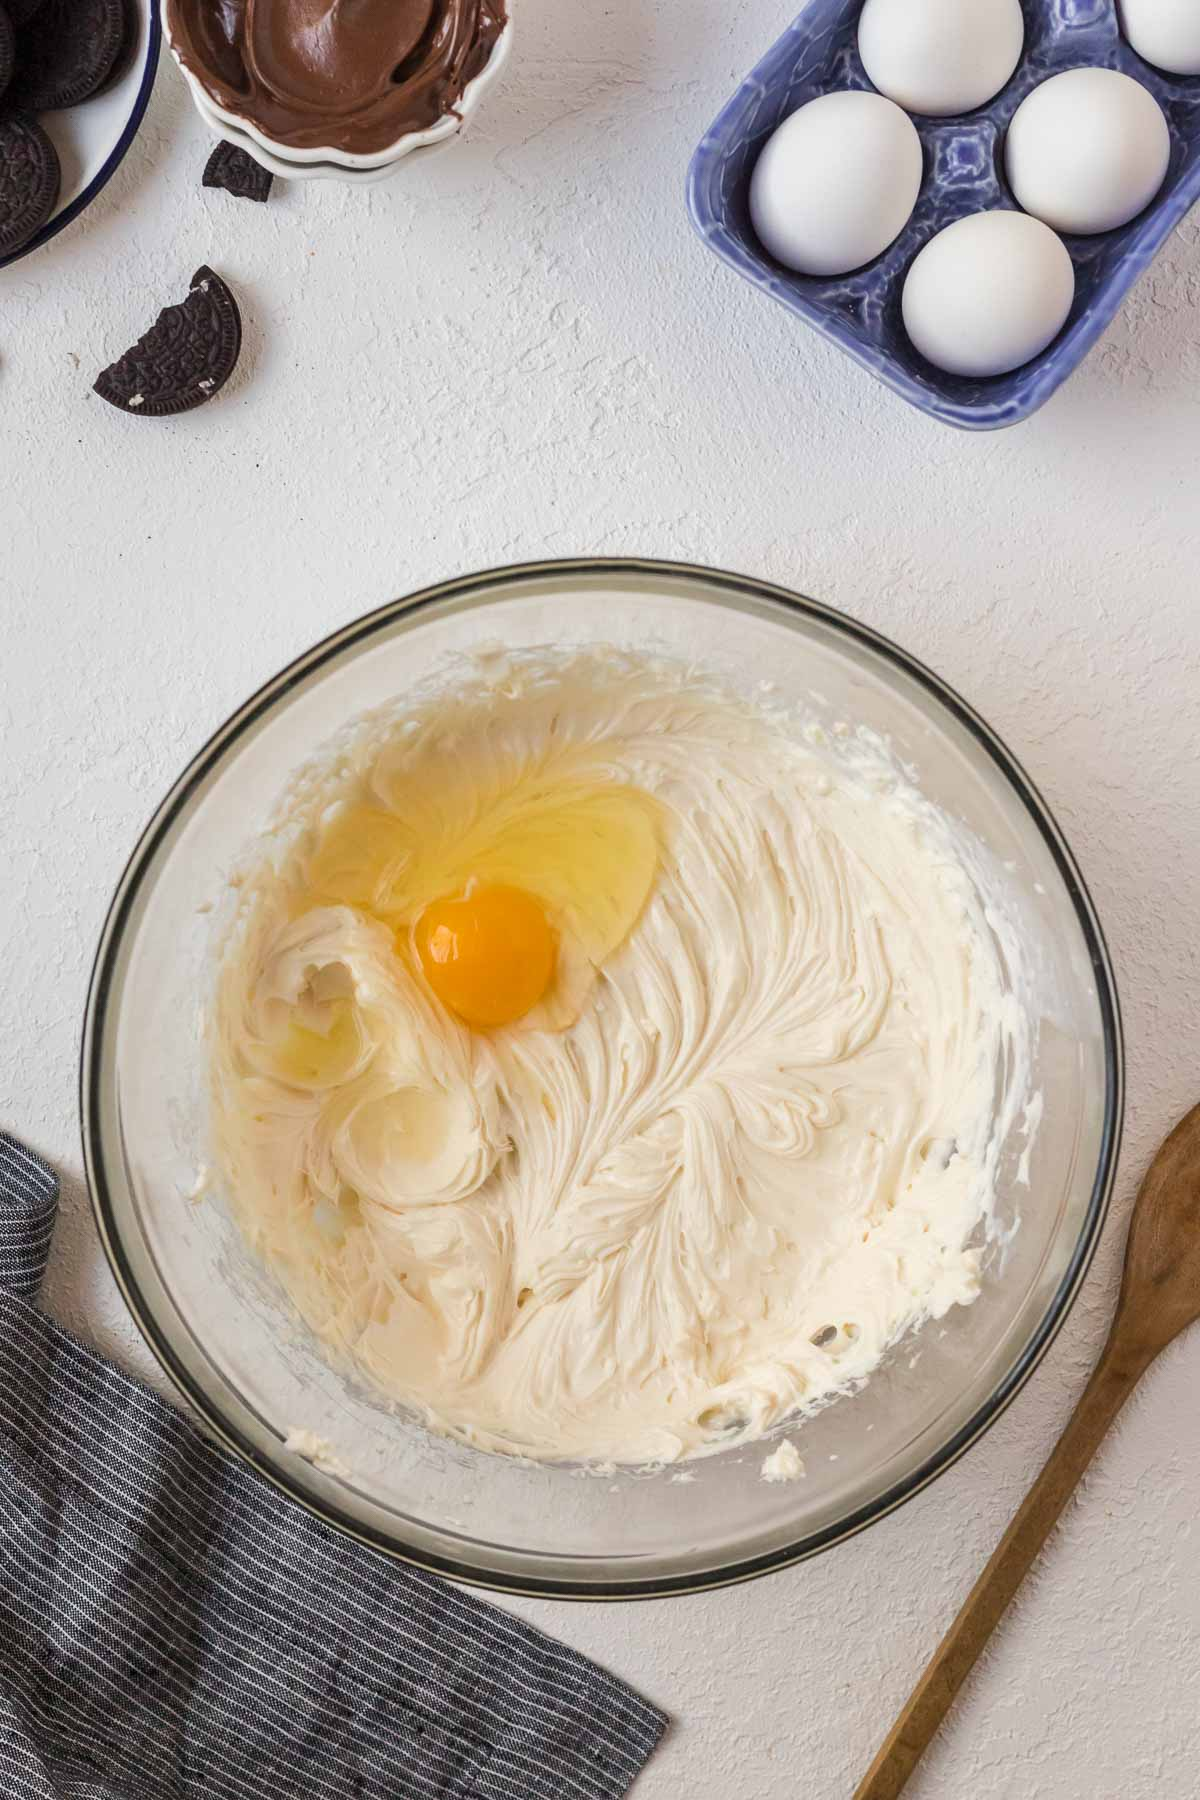 egg added to cheesecake batter in bowl